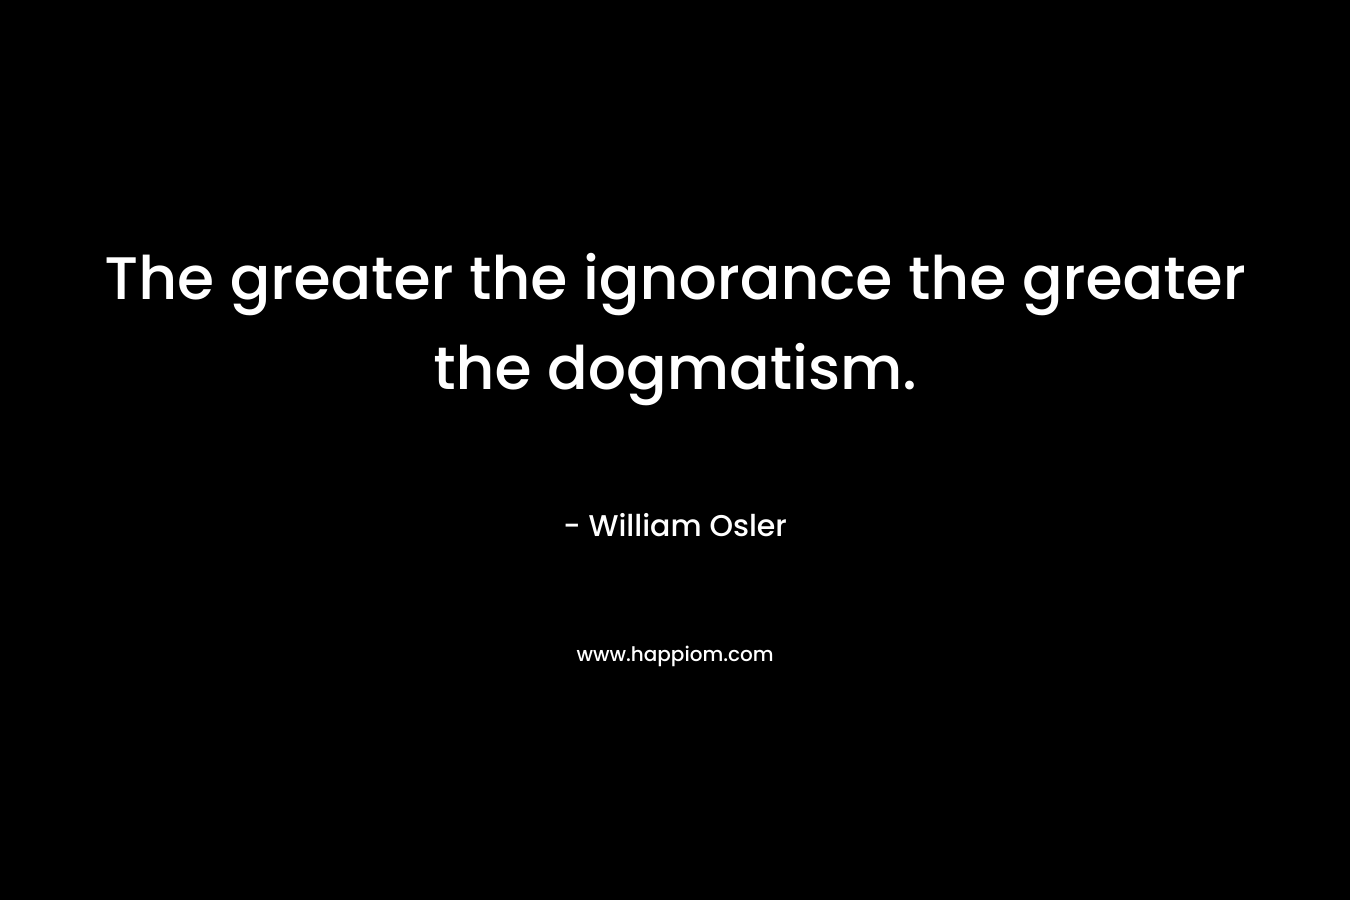 The greater the ignorance the greater the dogmatism. – William Osler